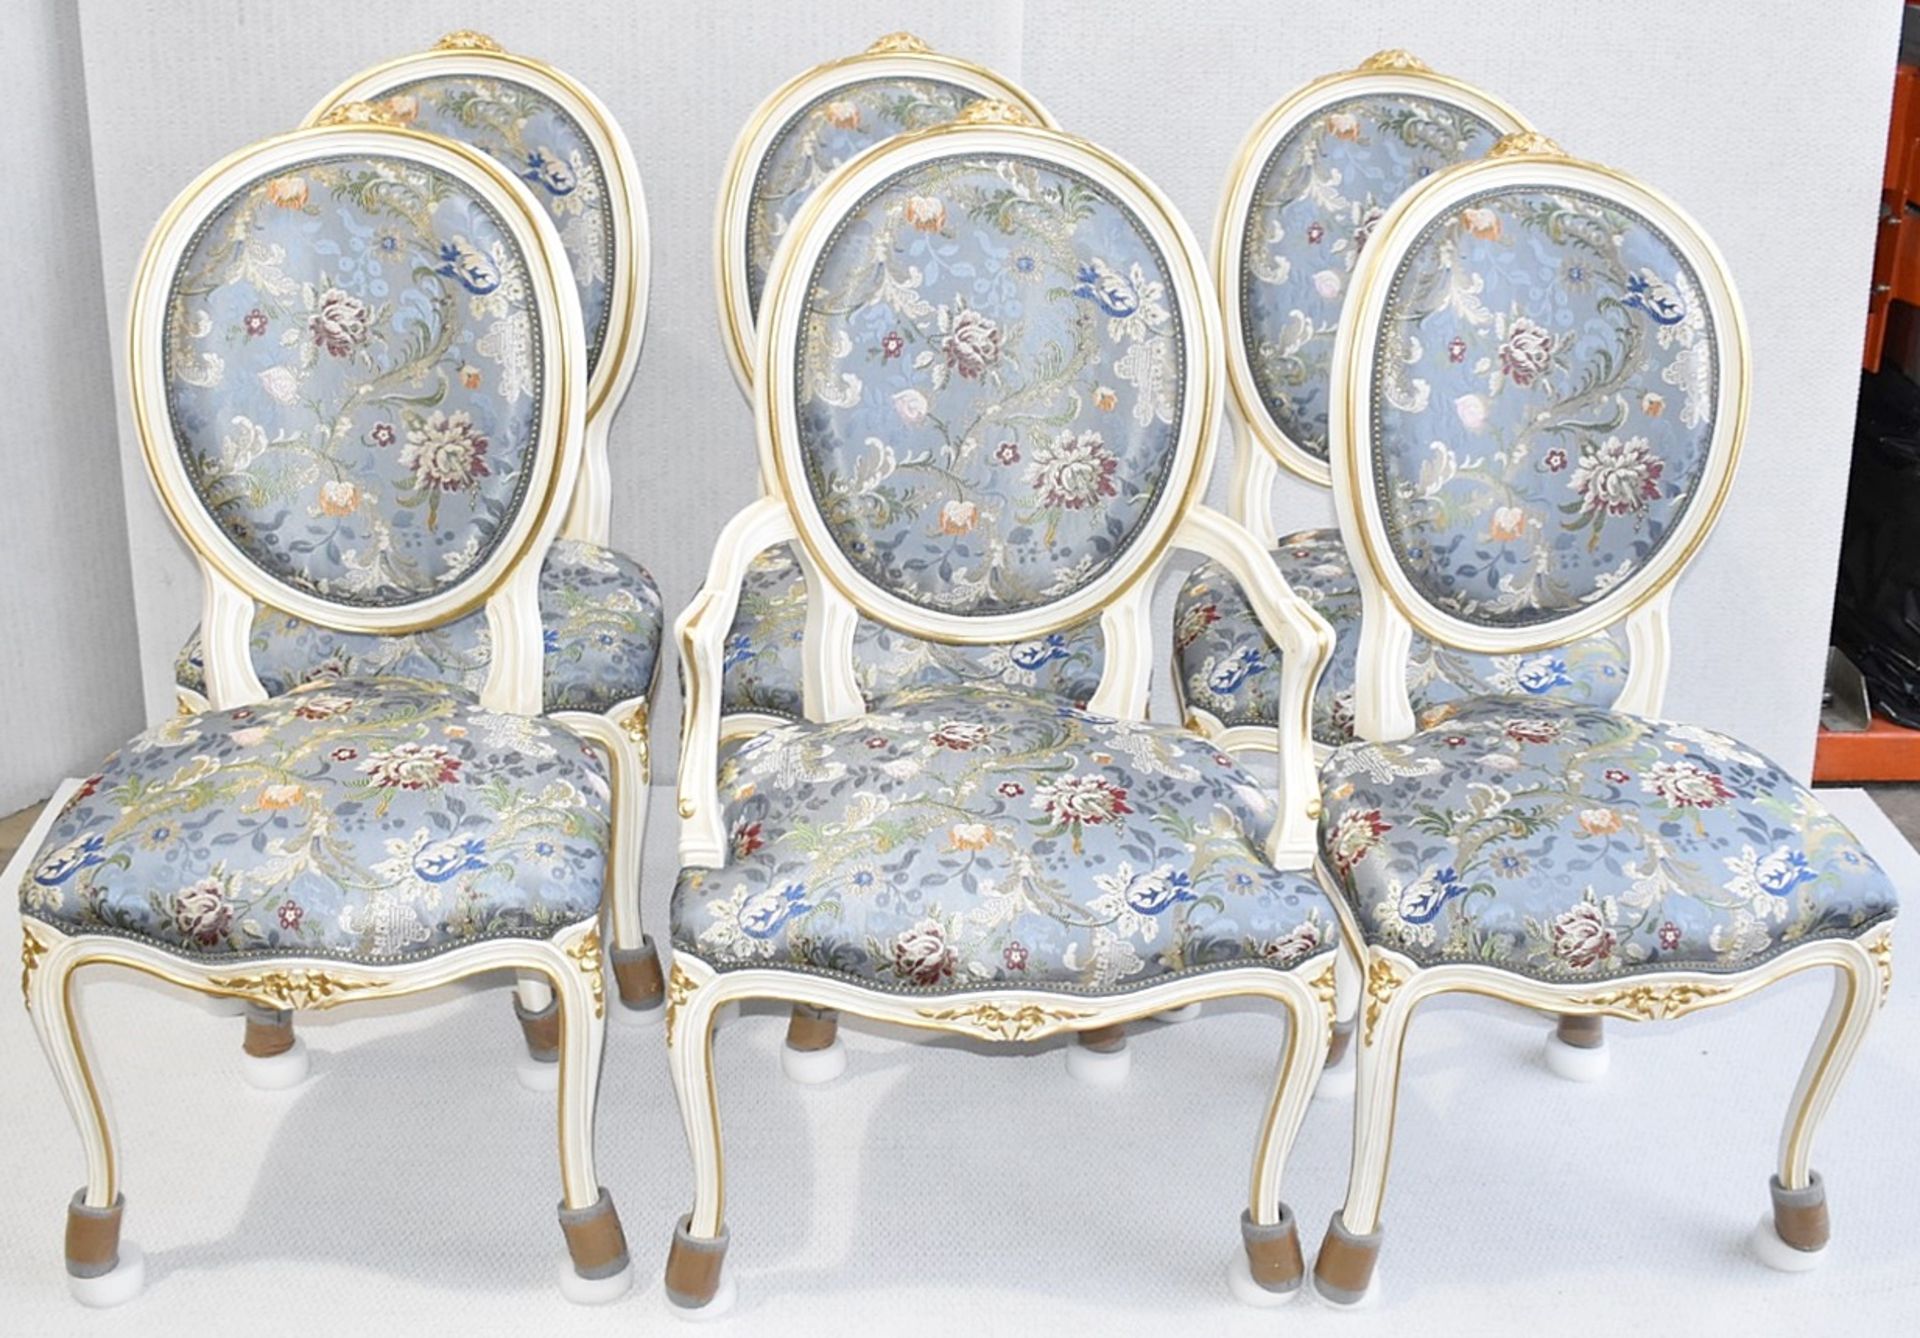 Set of 6 x ANGELO CAPPELLINI 'Timeless' Baroque-style Carved Dining Chairs, Floral Upholstered